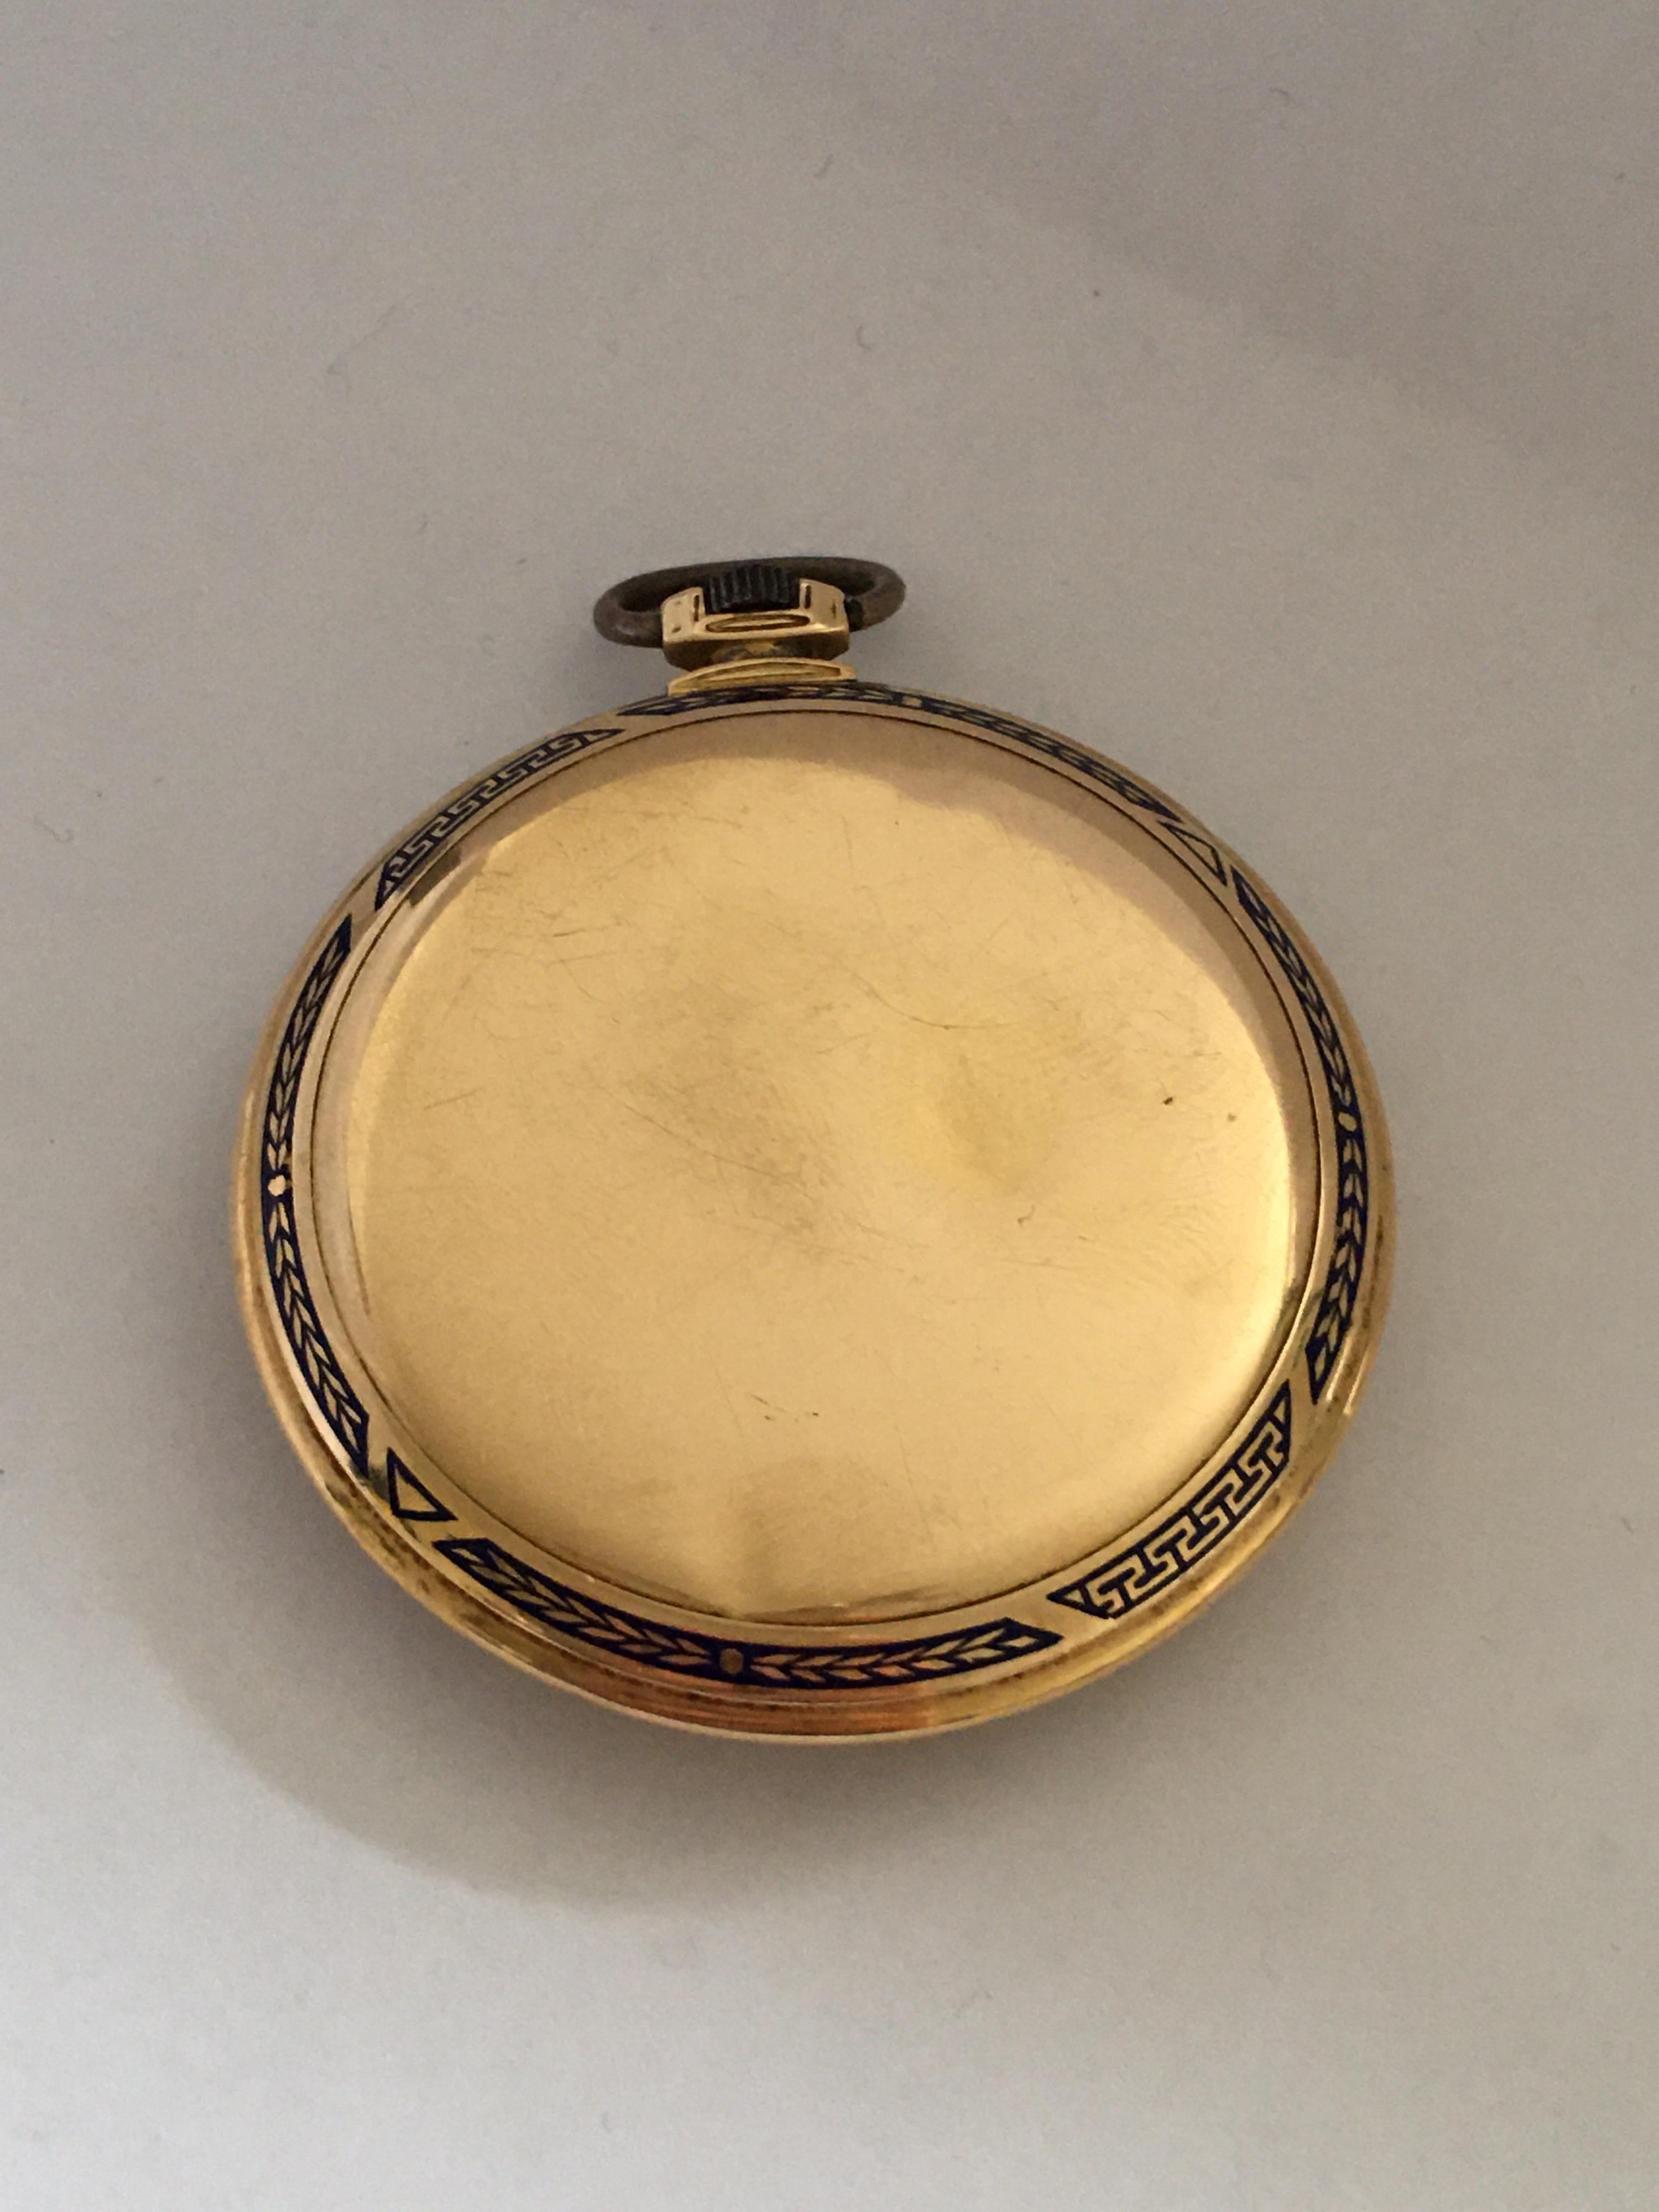 This beautiful 47mm diameter Gold Dress Watch is in good working condition and it is ticking well. Visible signs of ageing and wear with dial is a bit worn. Visible dents on the back cover and the side case. The loop or metal ring is tarnished as